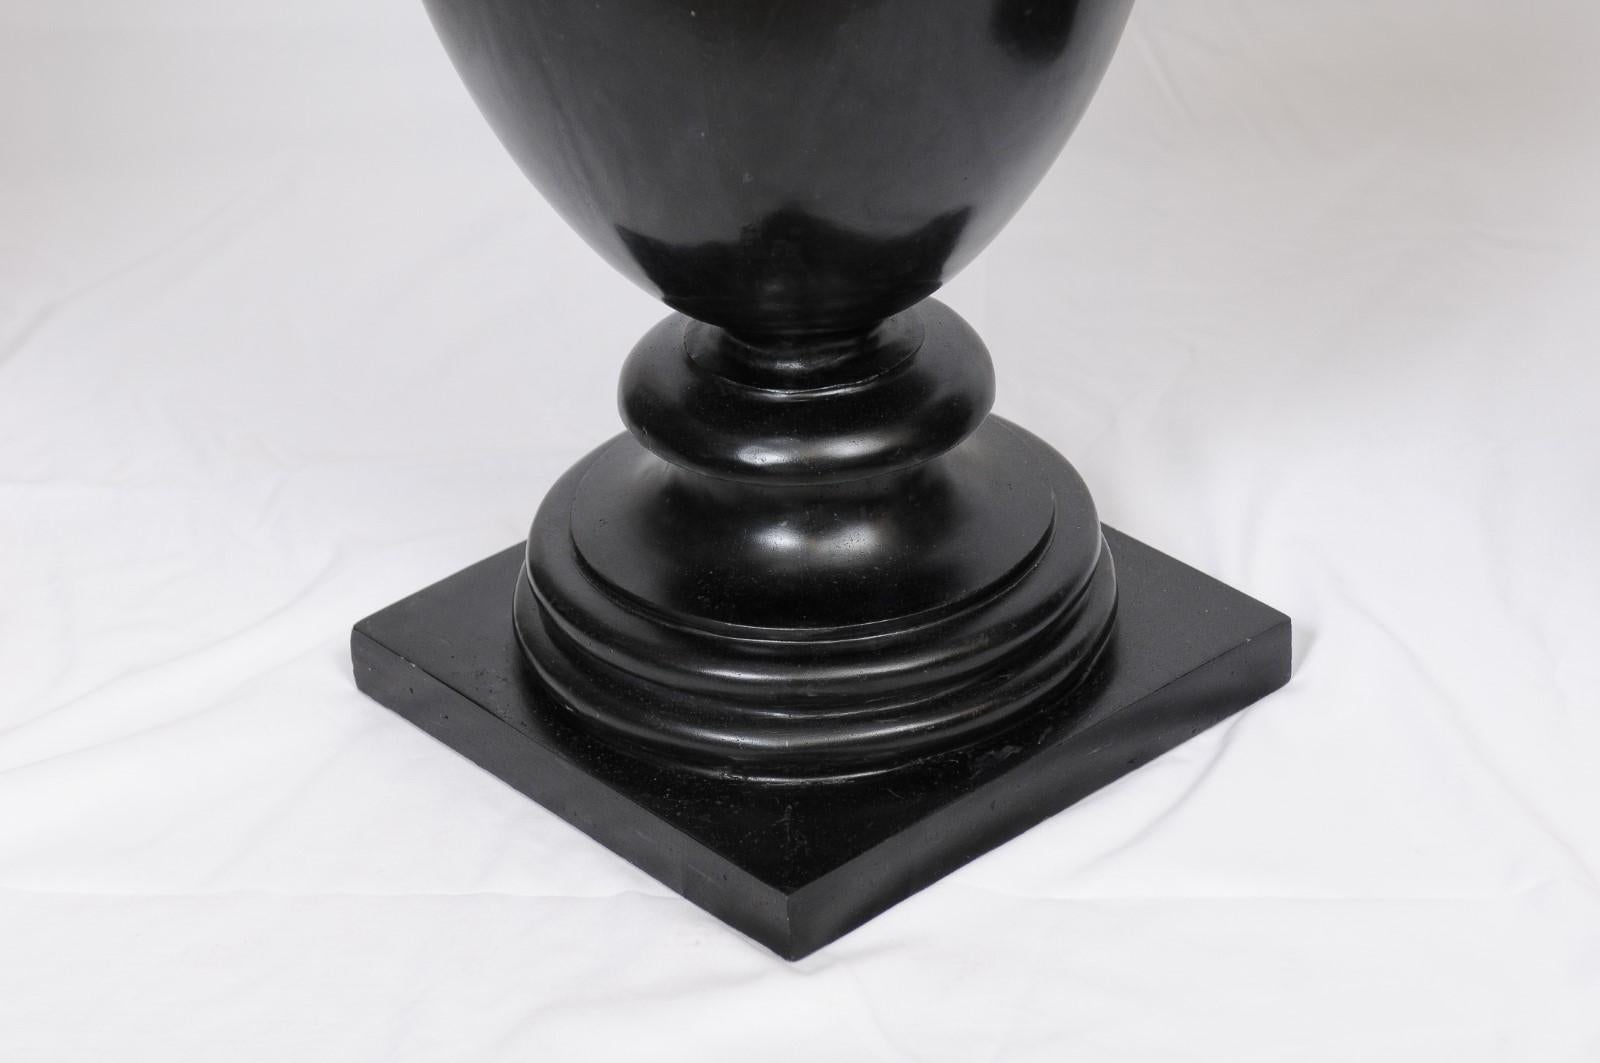 Contemporary Classical Urn with Cormorant Handles Cast in Black Wax Stone